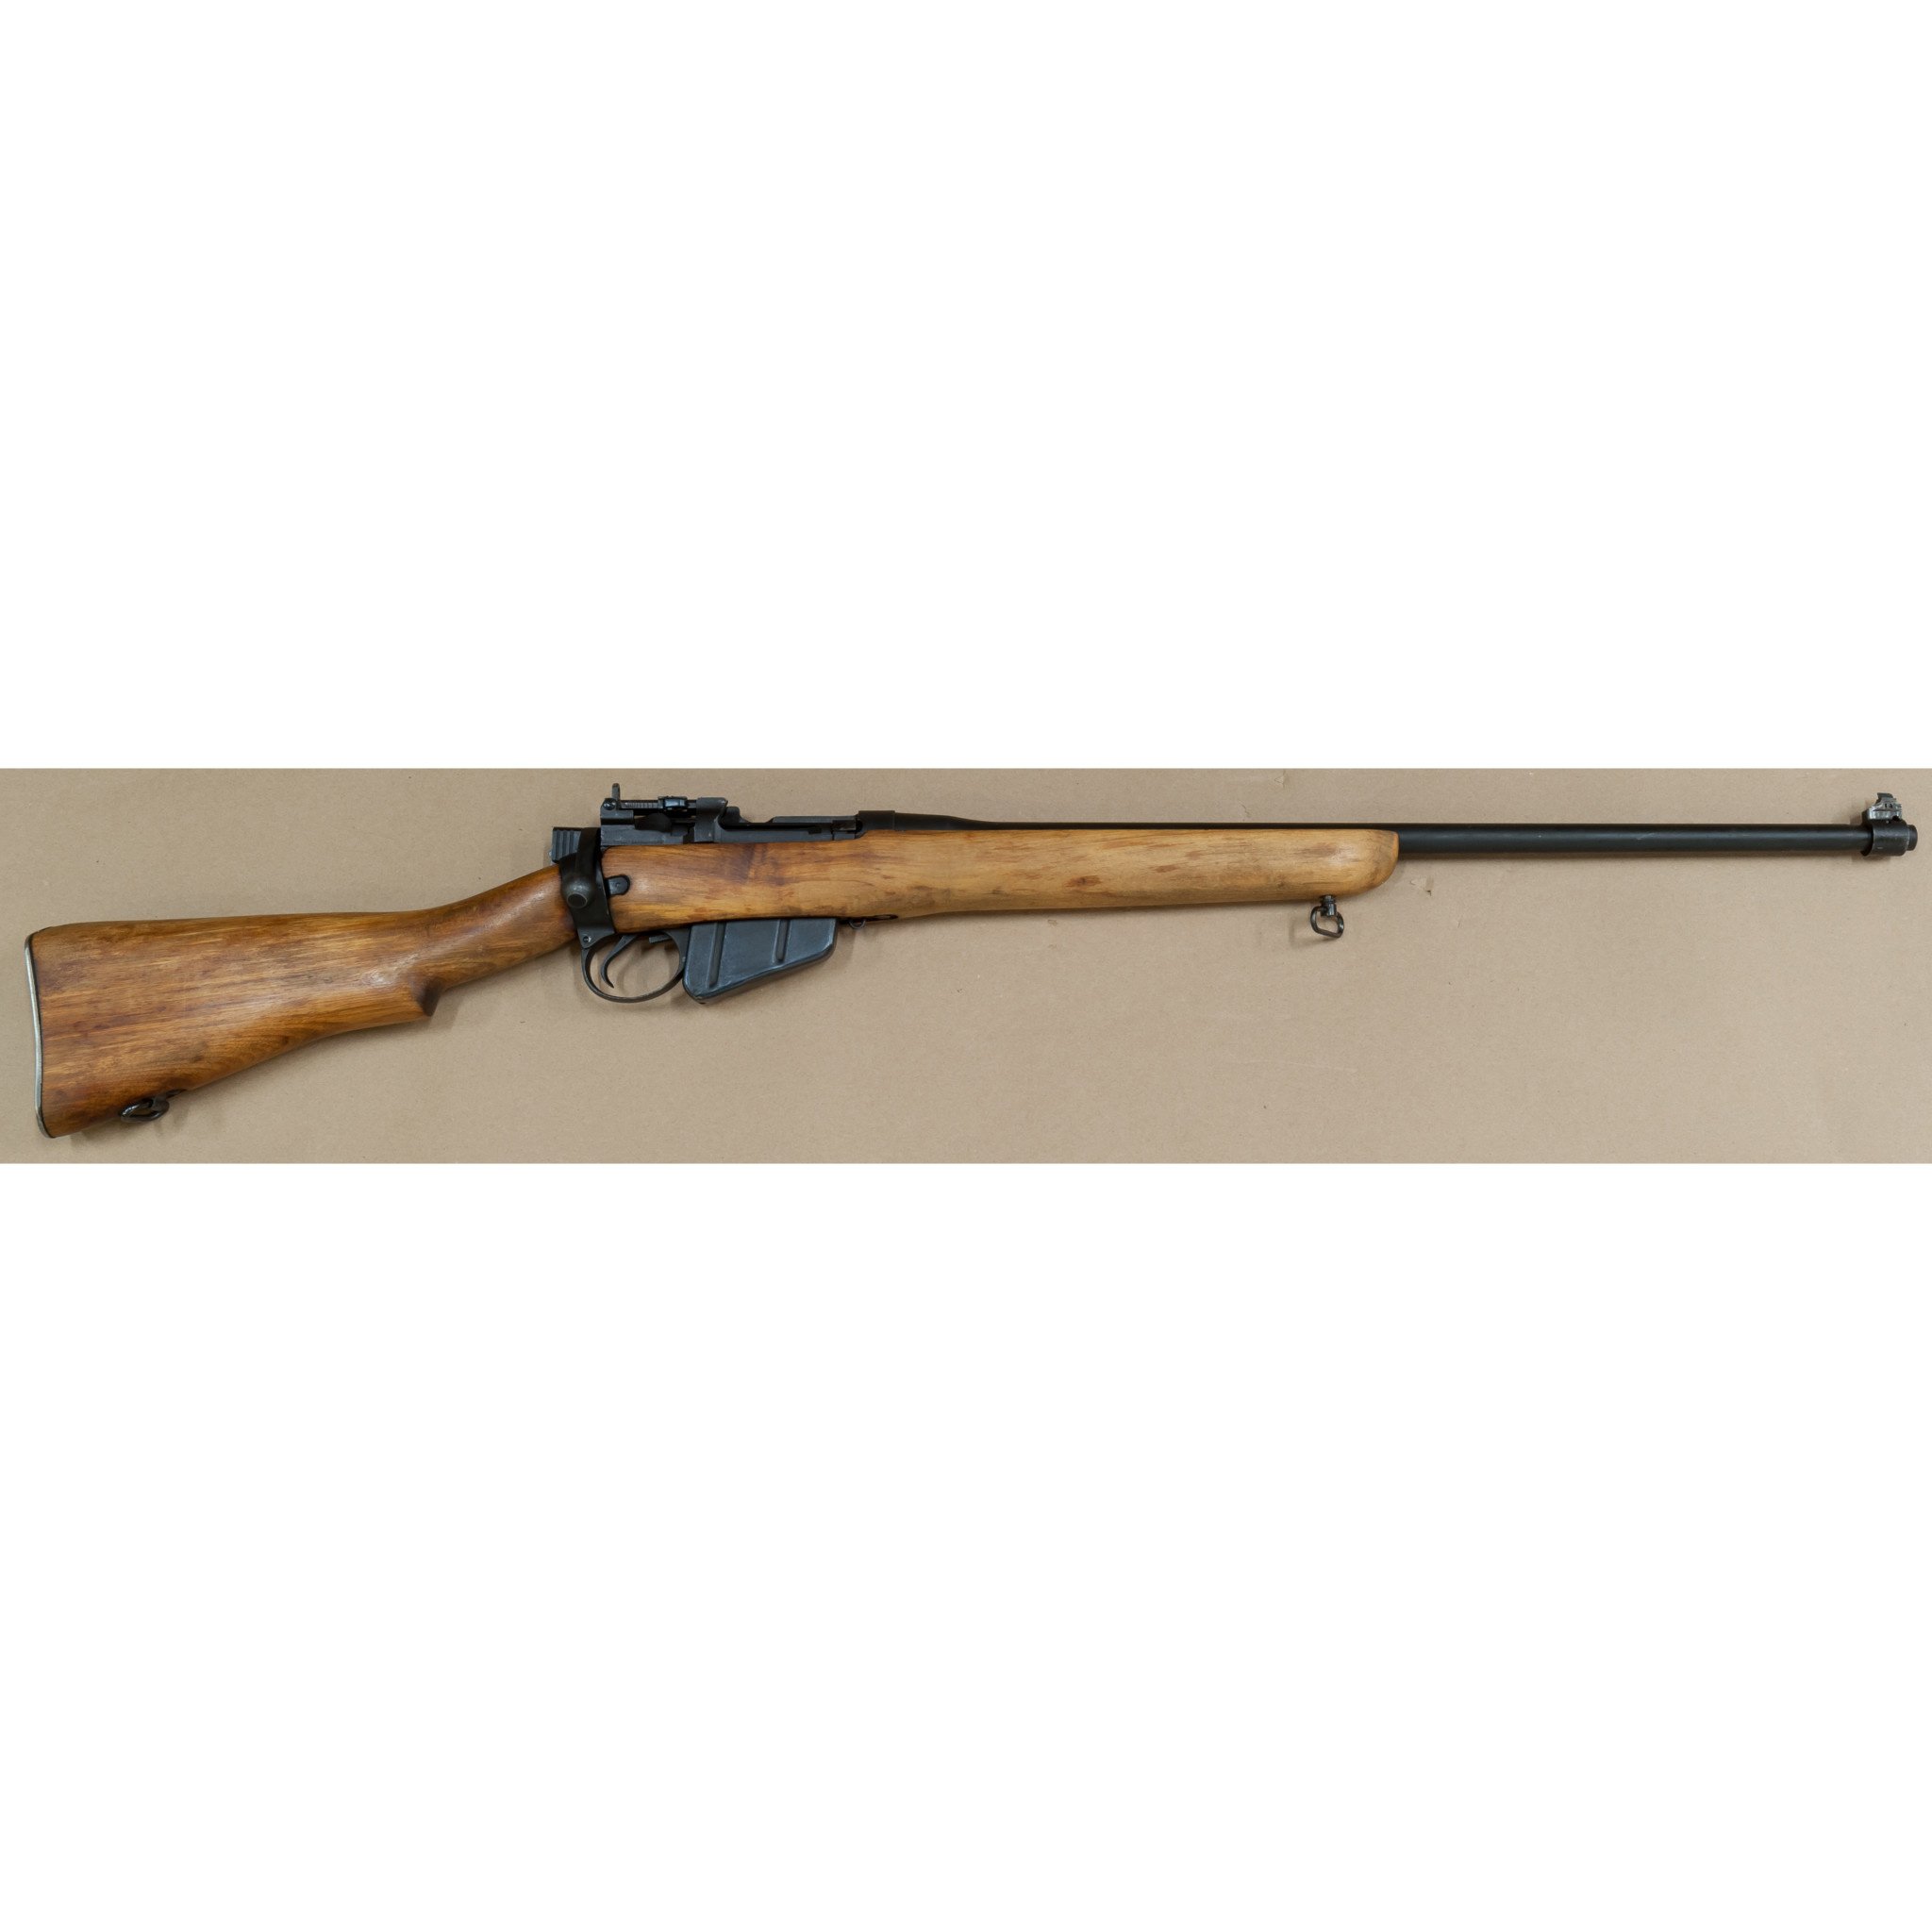 LEE ENFIELD NO 4 SPORTER 303BRITISH RIFLE - Goble's Firearms